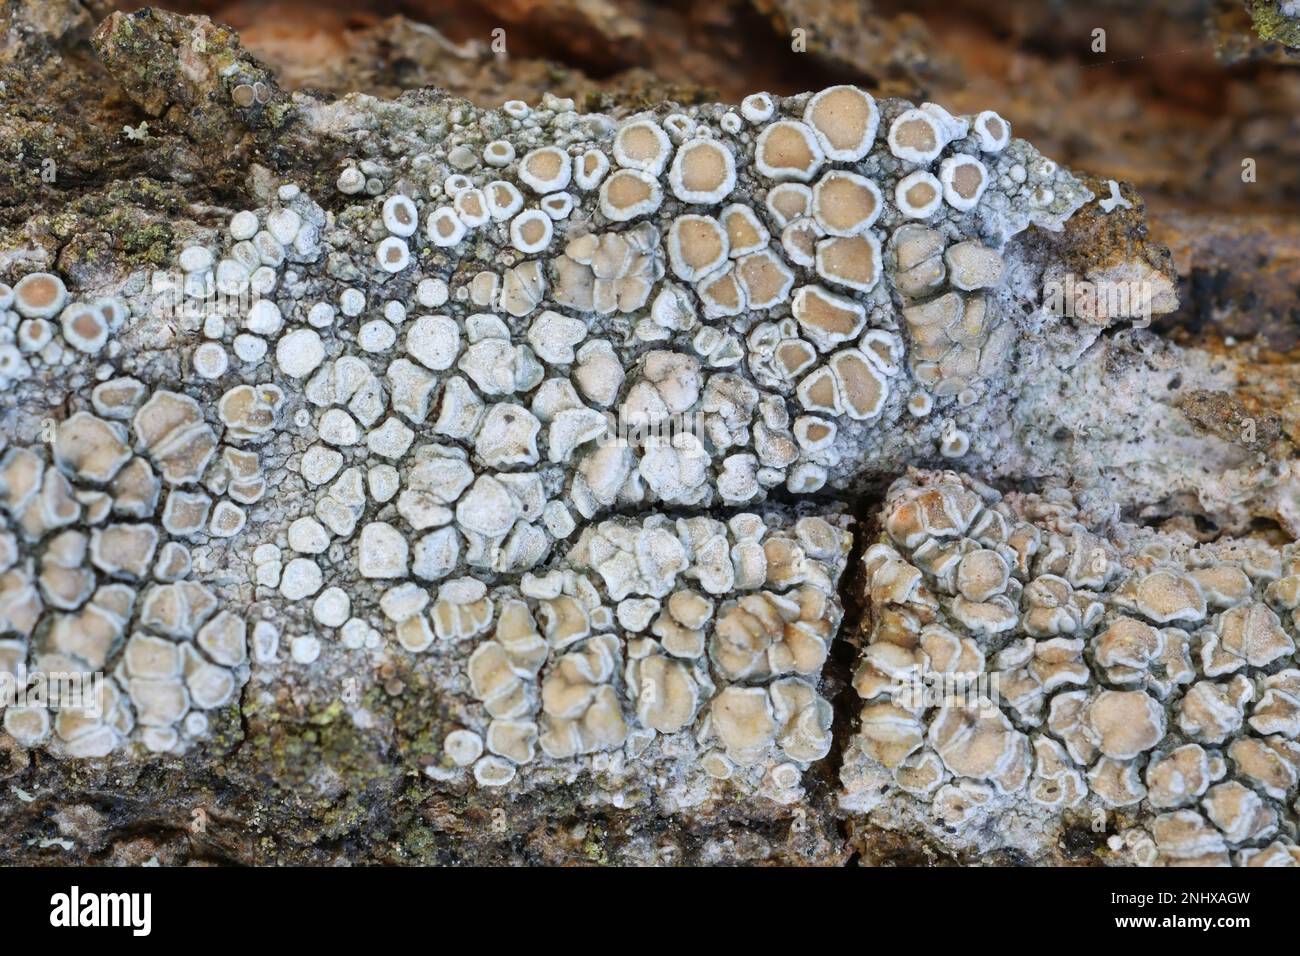 Lecanora chlarotera, known as brown rim-lichen, growing on Norway maple in Finland Stock Photo